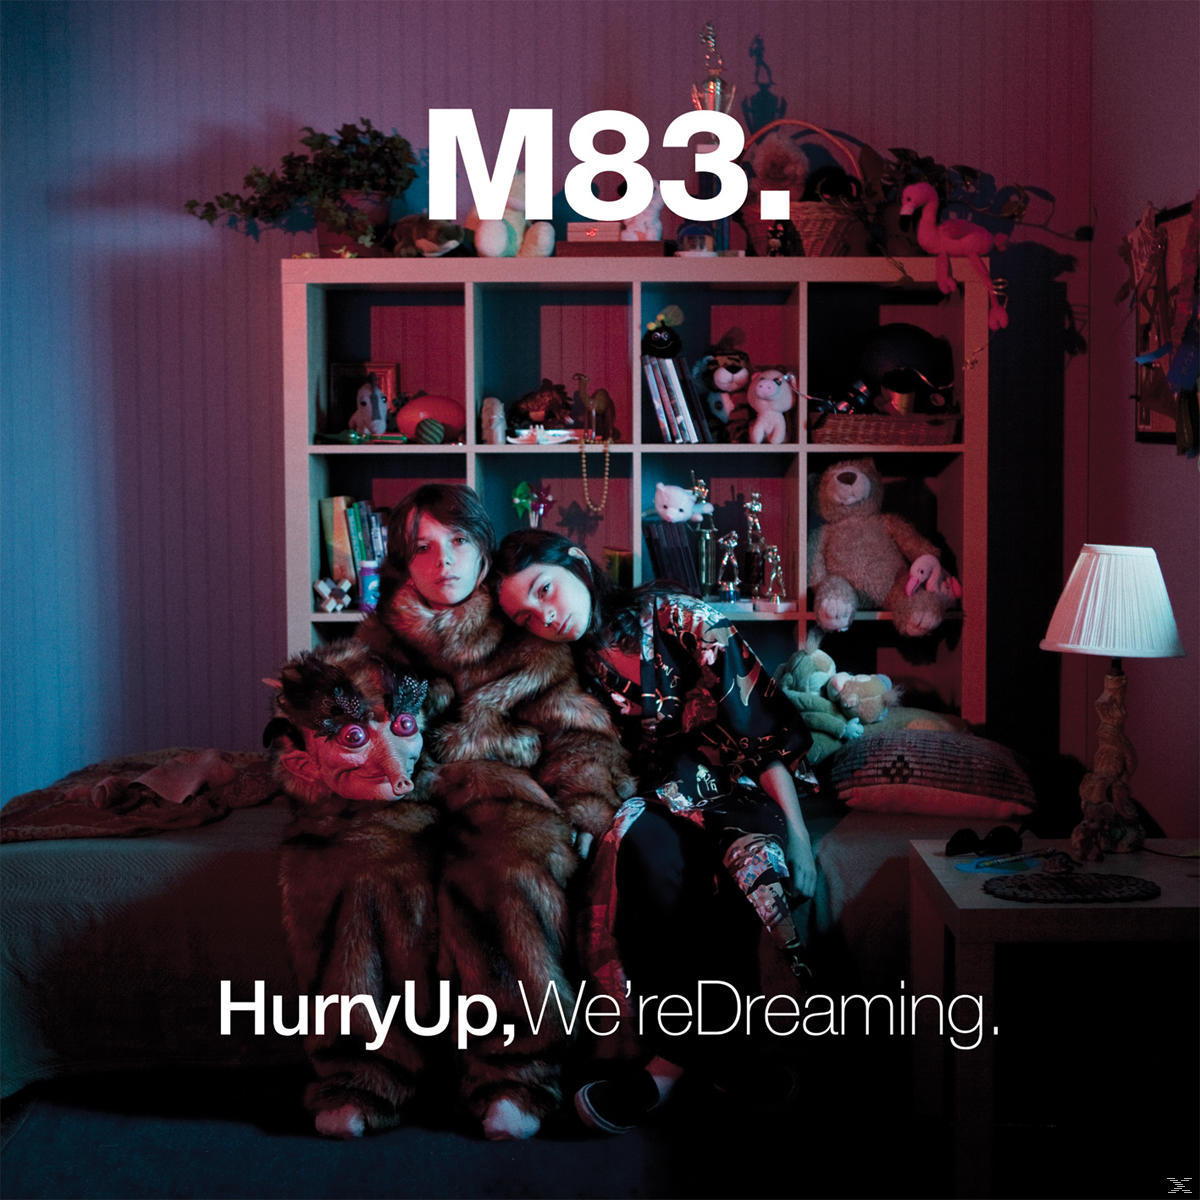 - Hurry (Vinyl) We\'re Up, M83 Dreaming. -